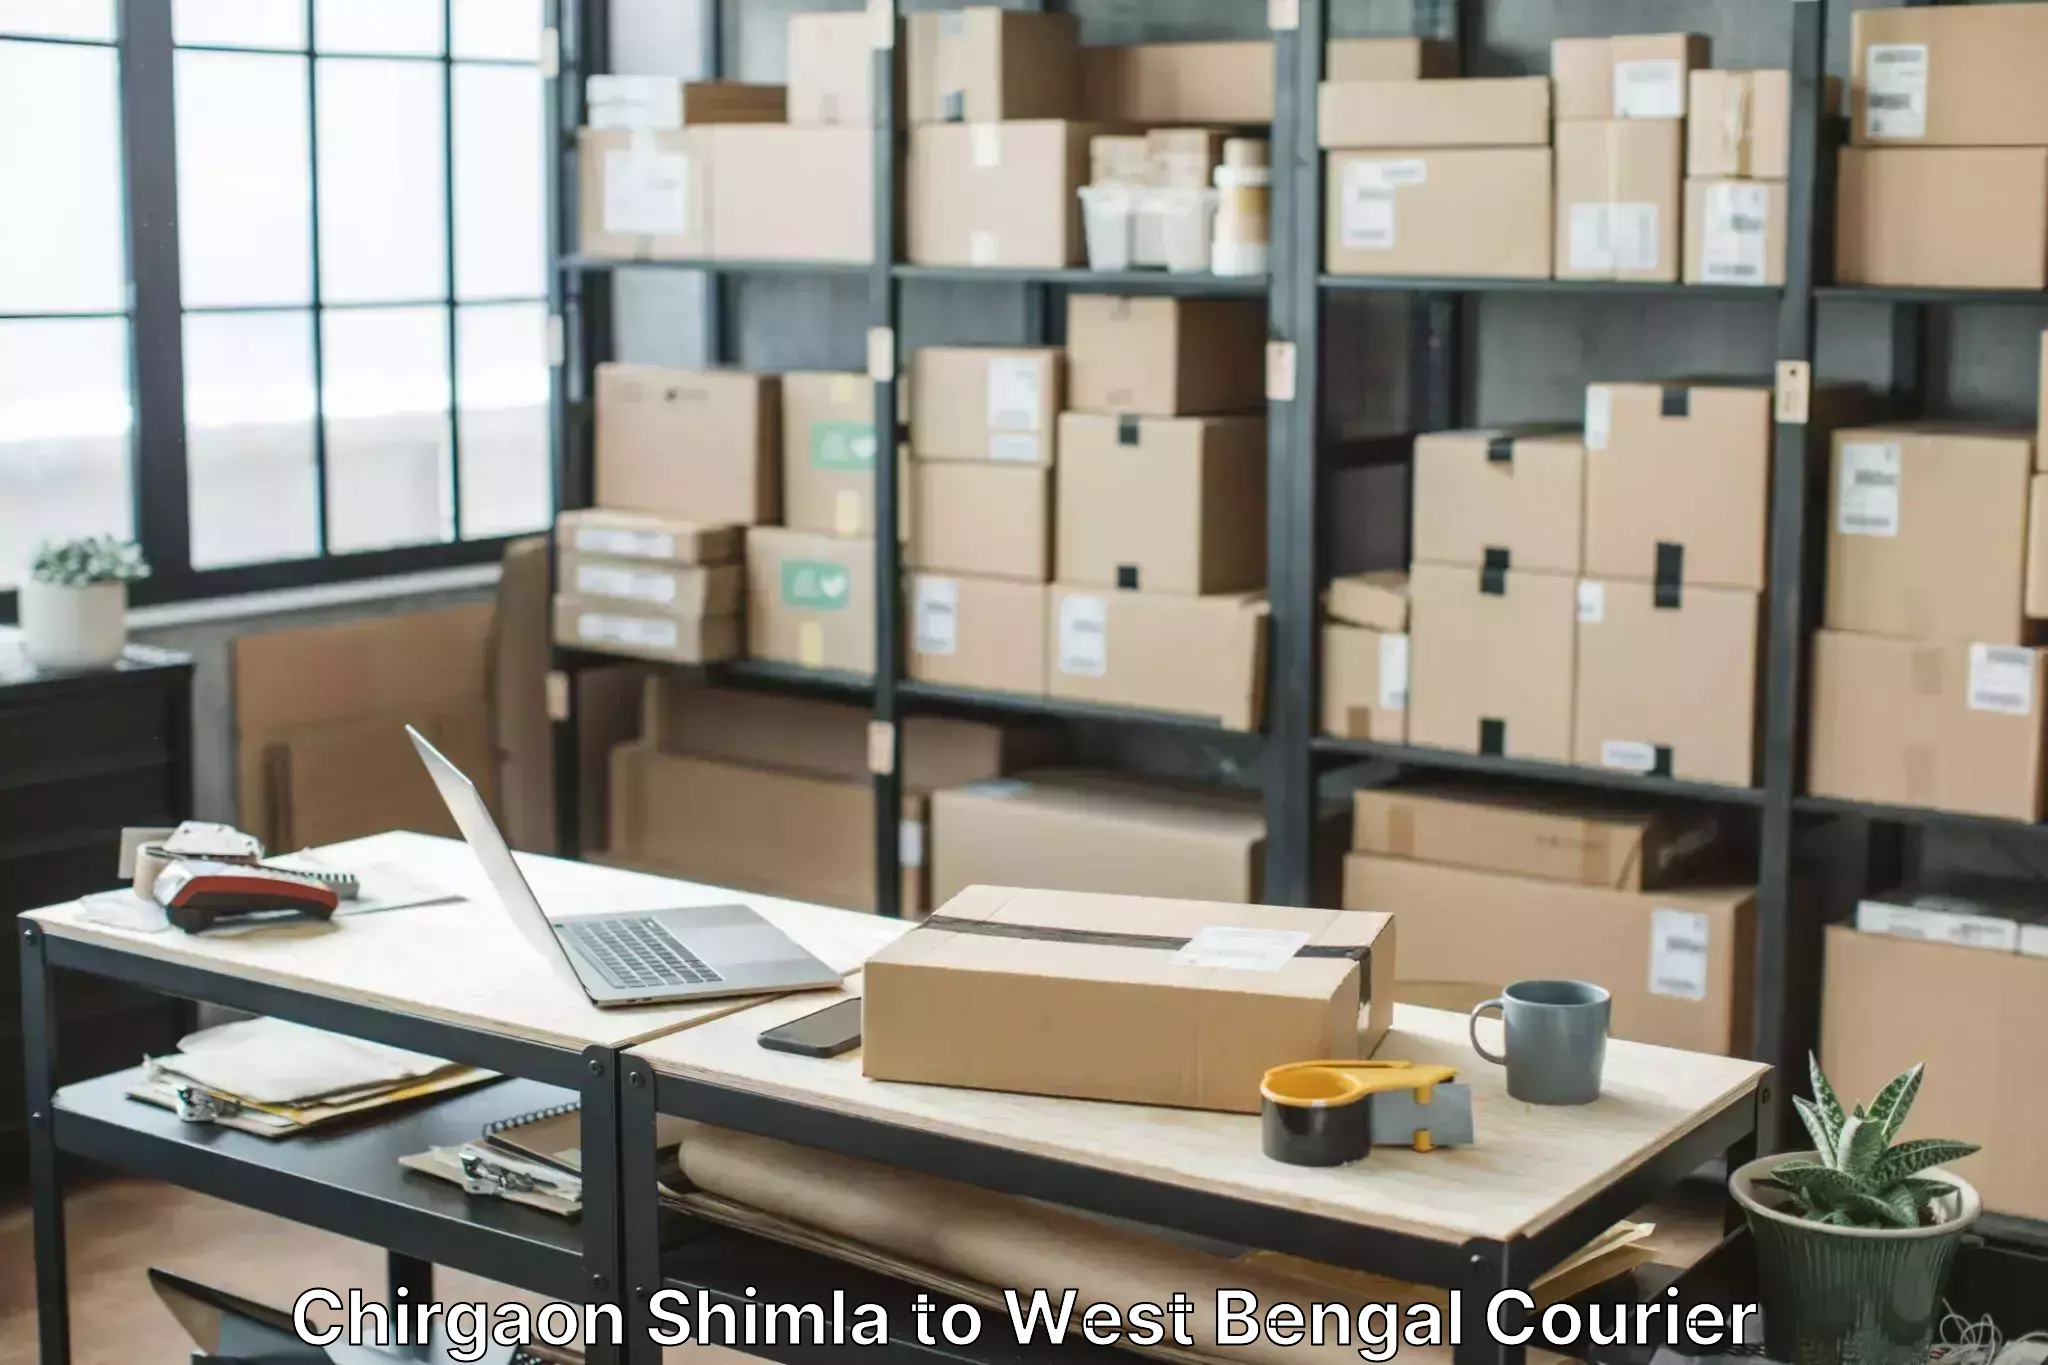 Furniture shipping services Chirgaon Shimla to West Bengal